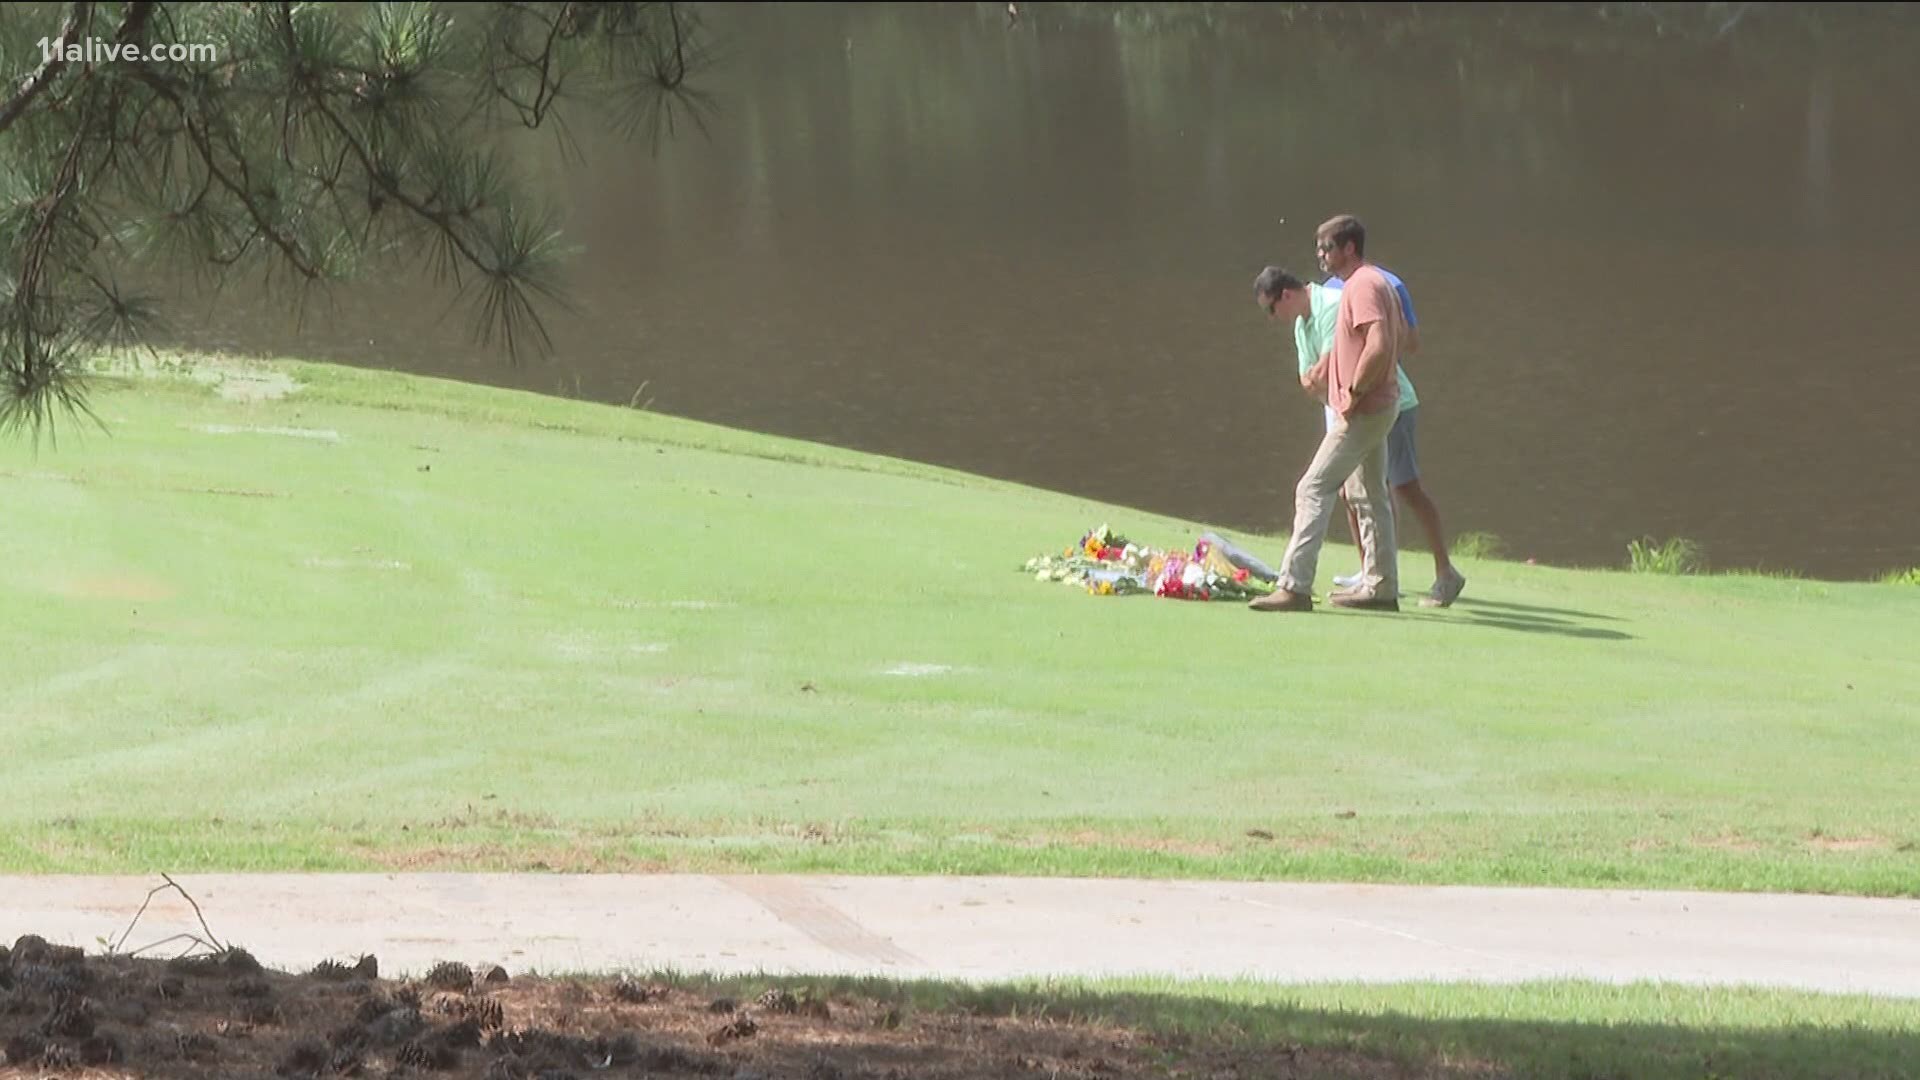 Police said the golf pro was not targeted.